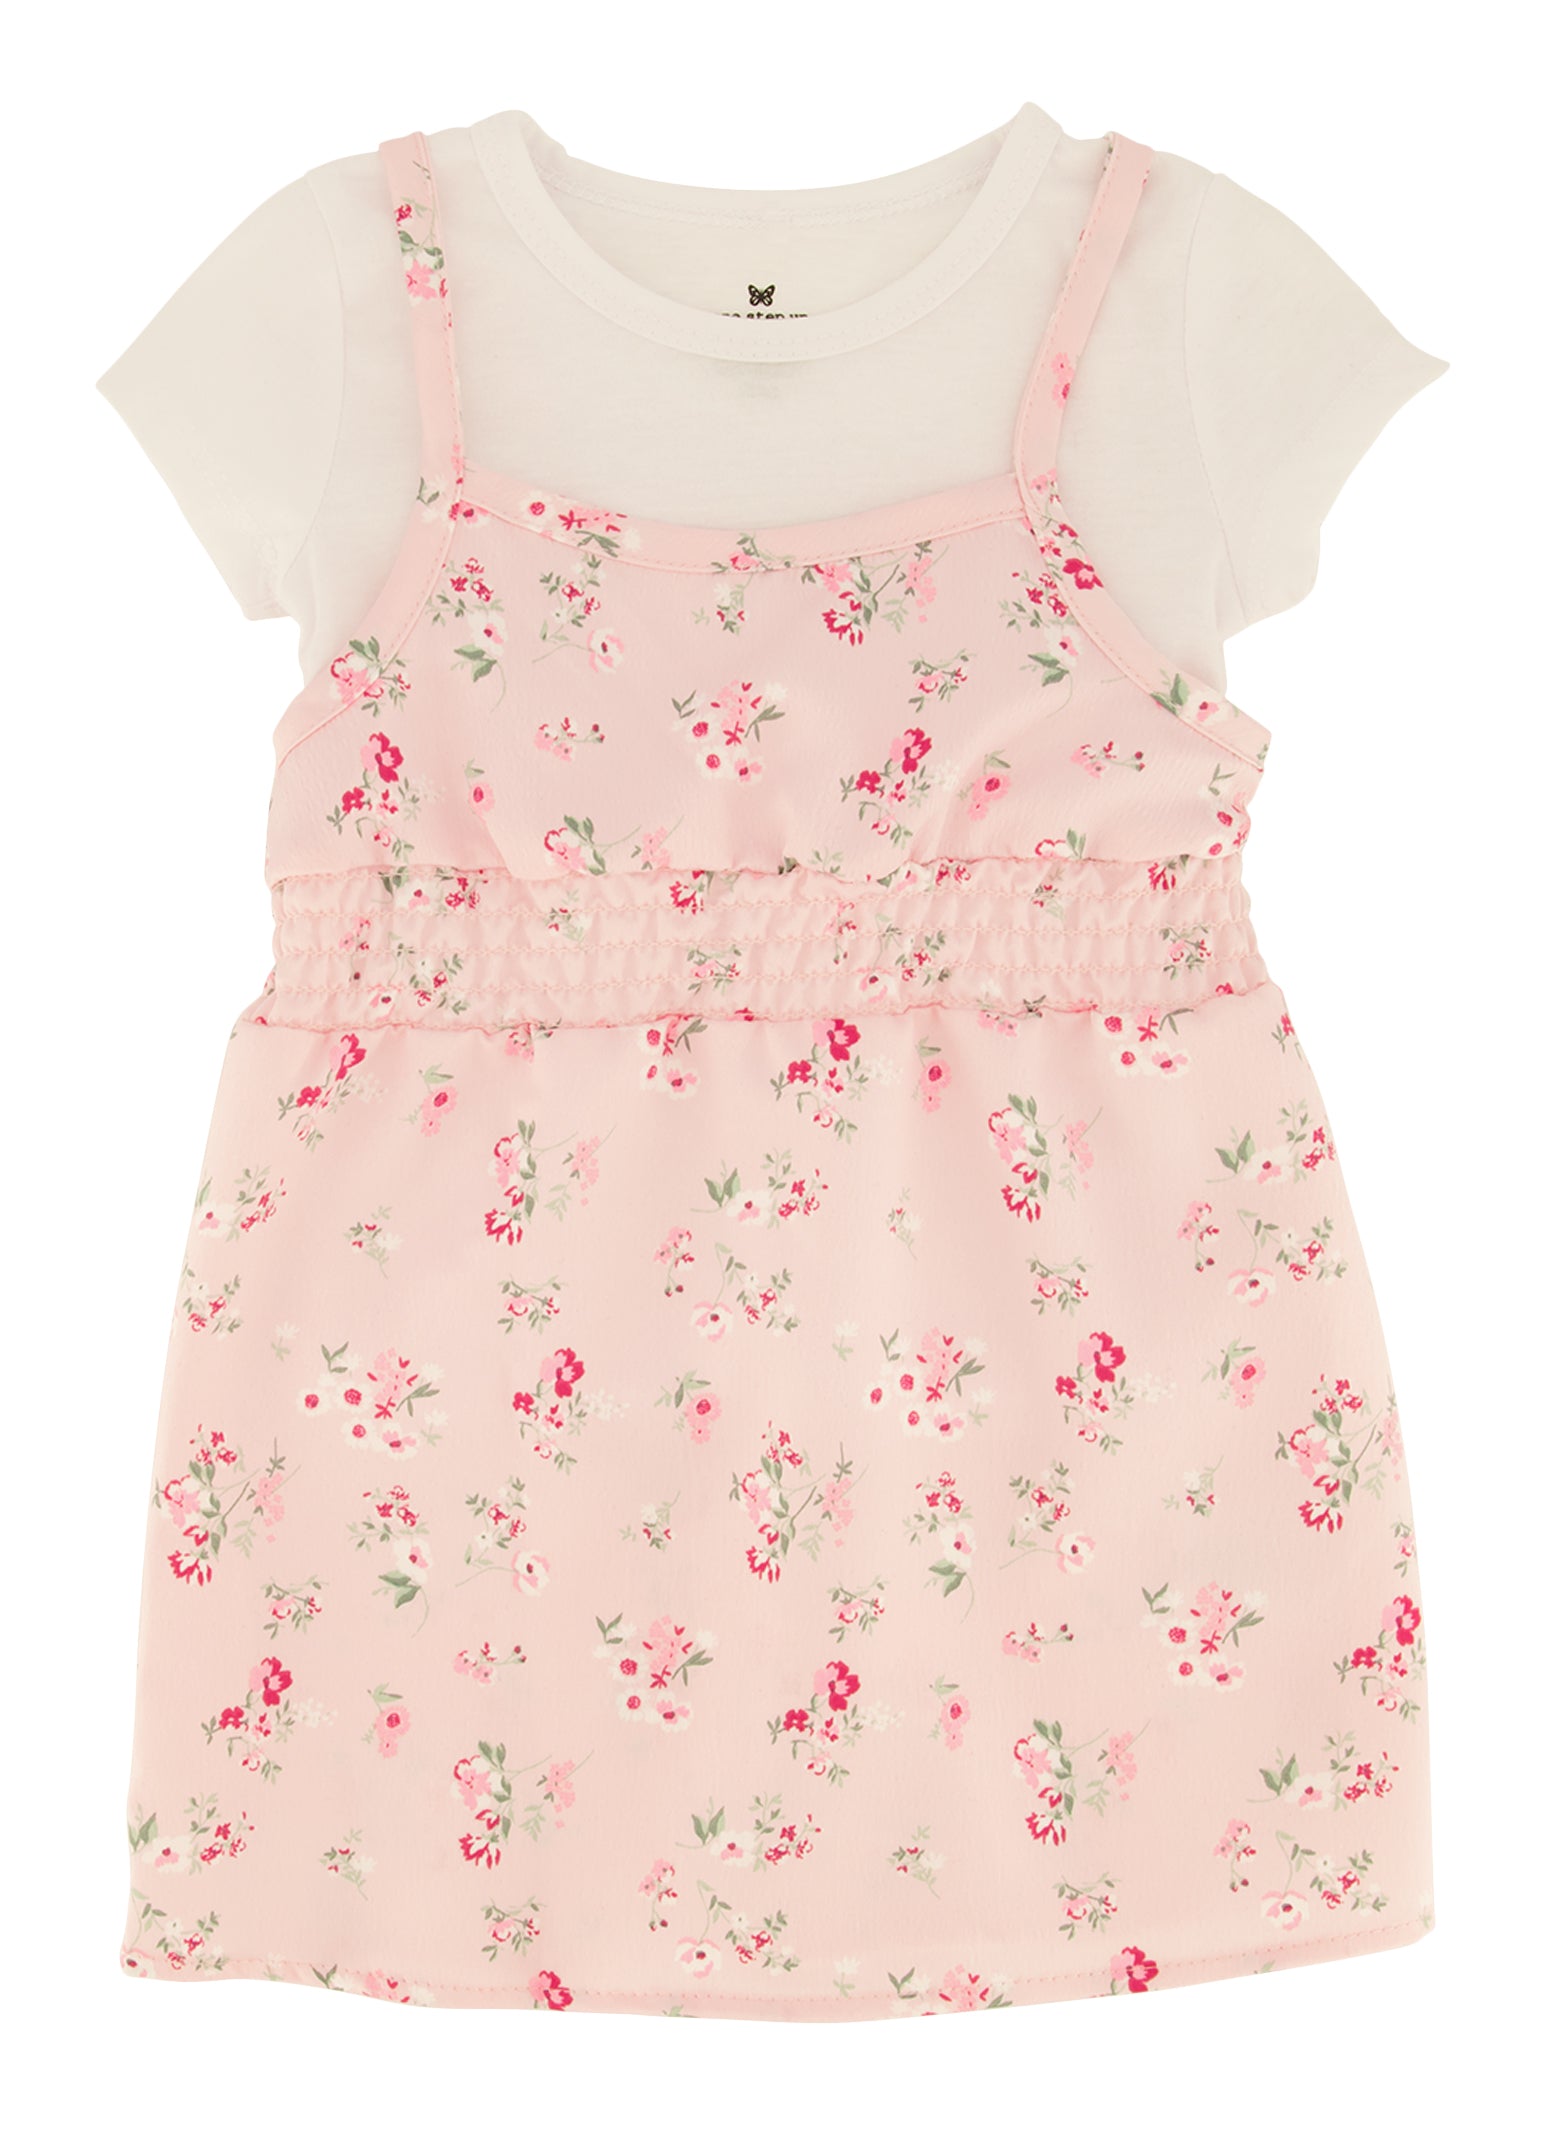 Toddler Girls Floral Print Cami Dress with Short Sleeve Top